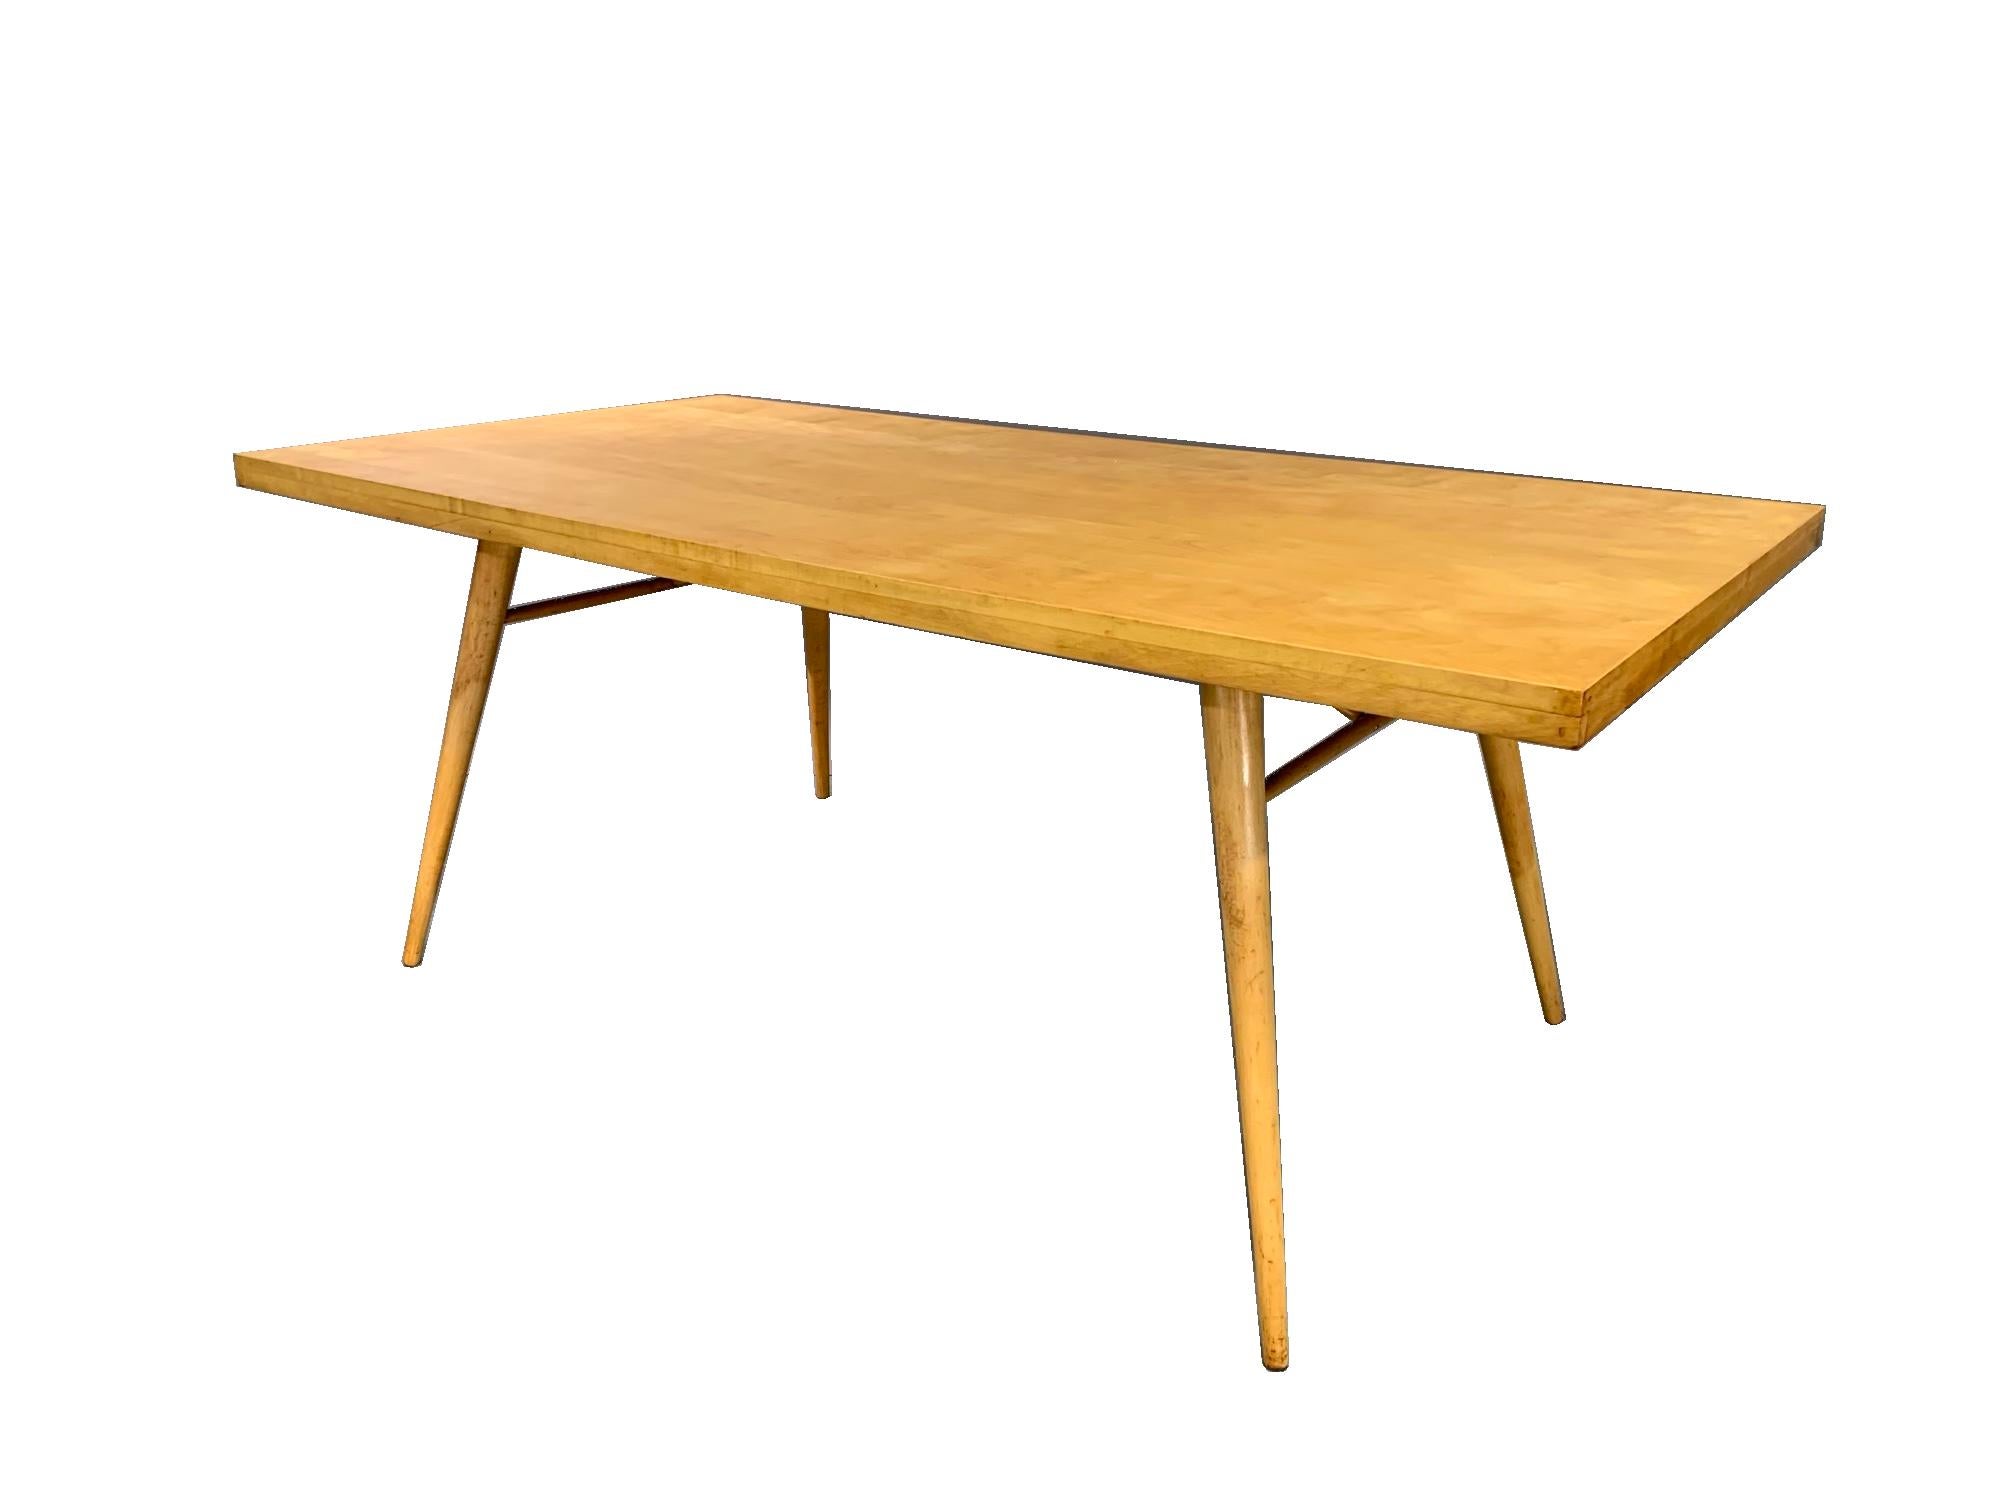 A satin clear coat finished solid maple McCobb dining table with active wood grain and gracefully splayed conical legs from Paul McCobb's Planner Group Collection for the Winchendon Furniture Company. Bright blonde wood table designed in simple,